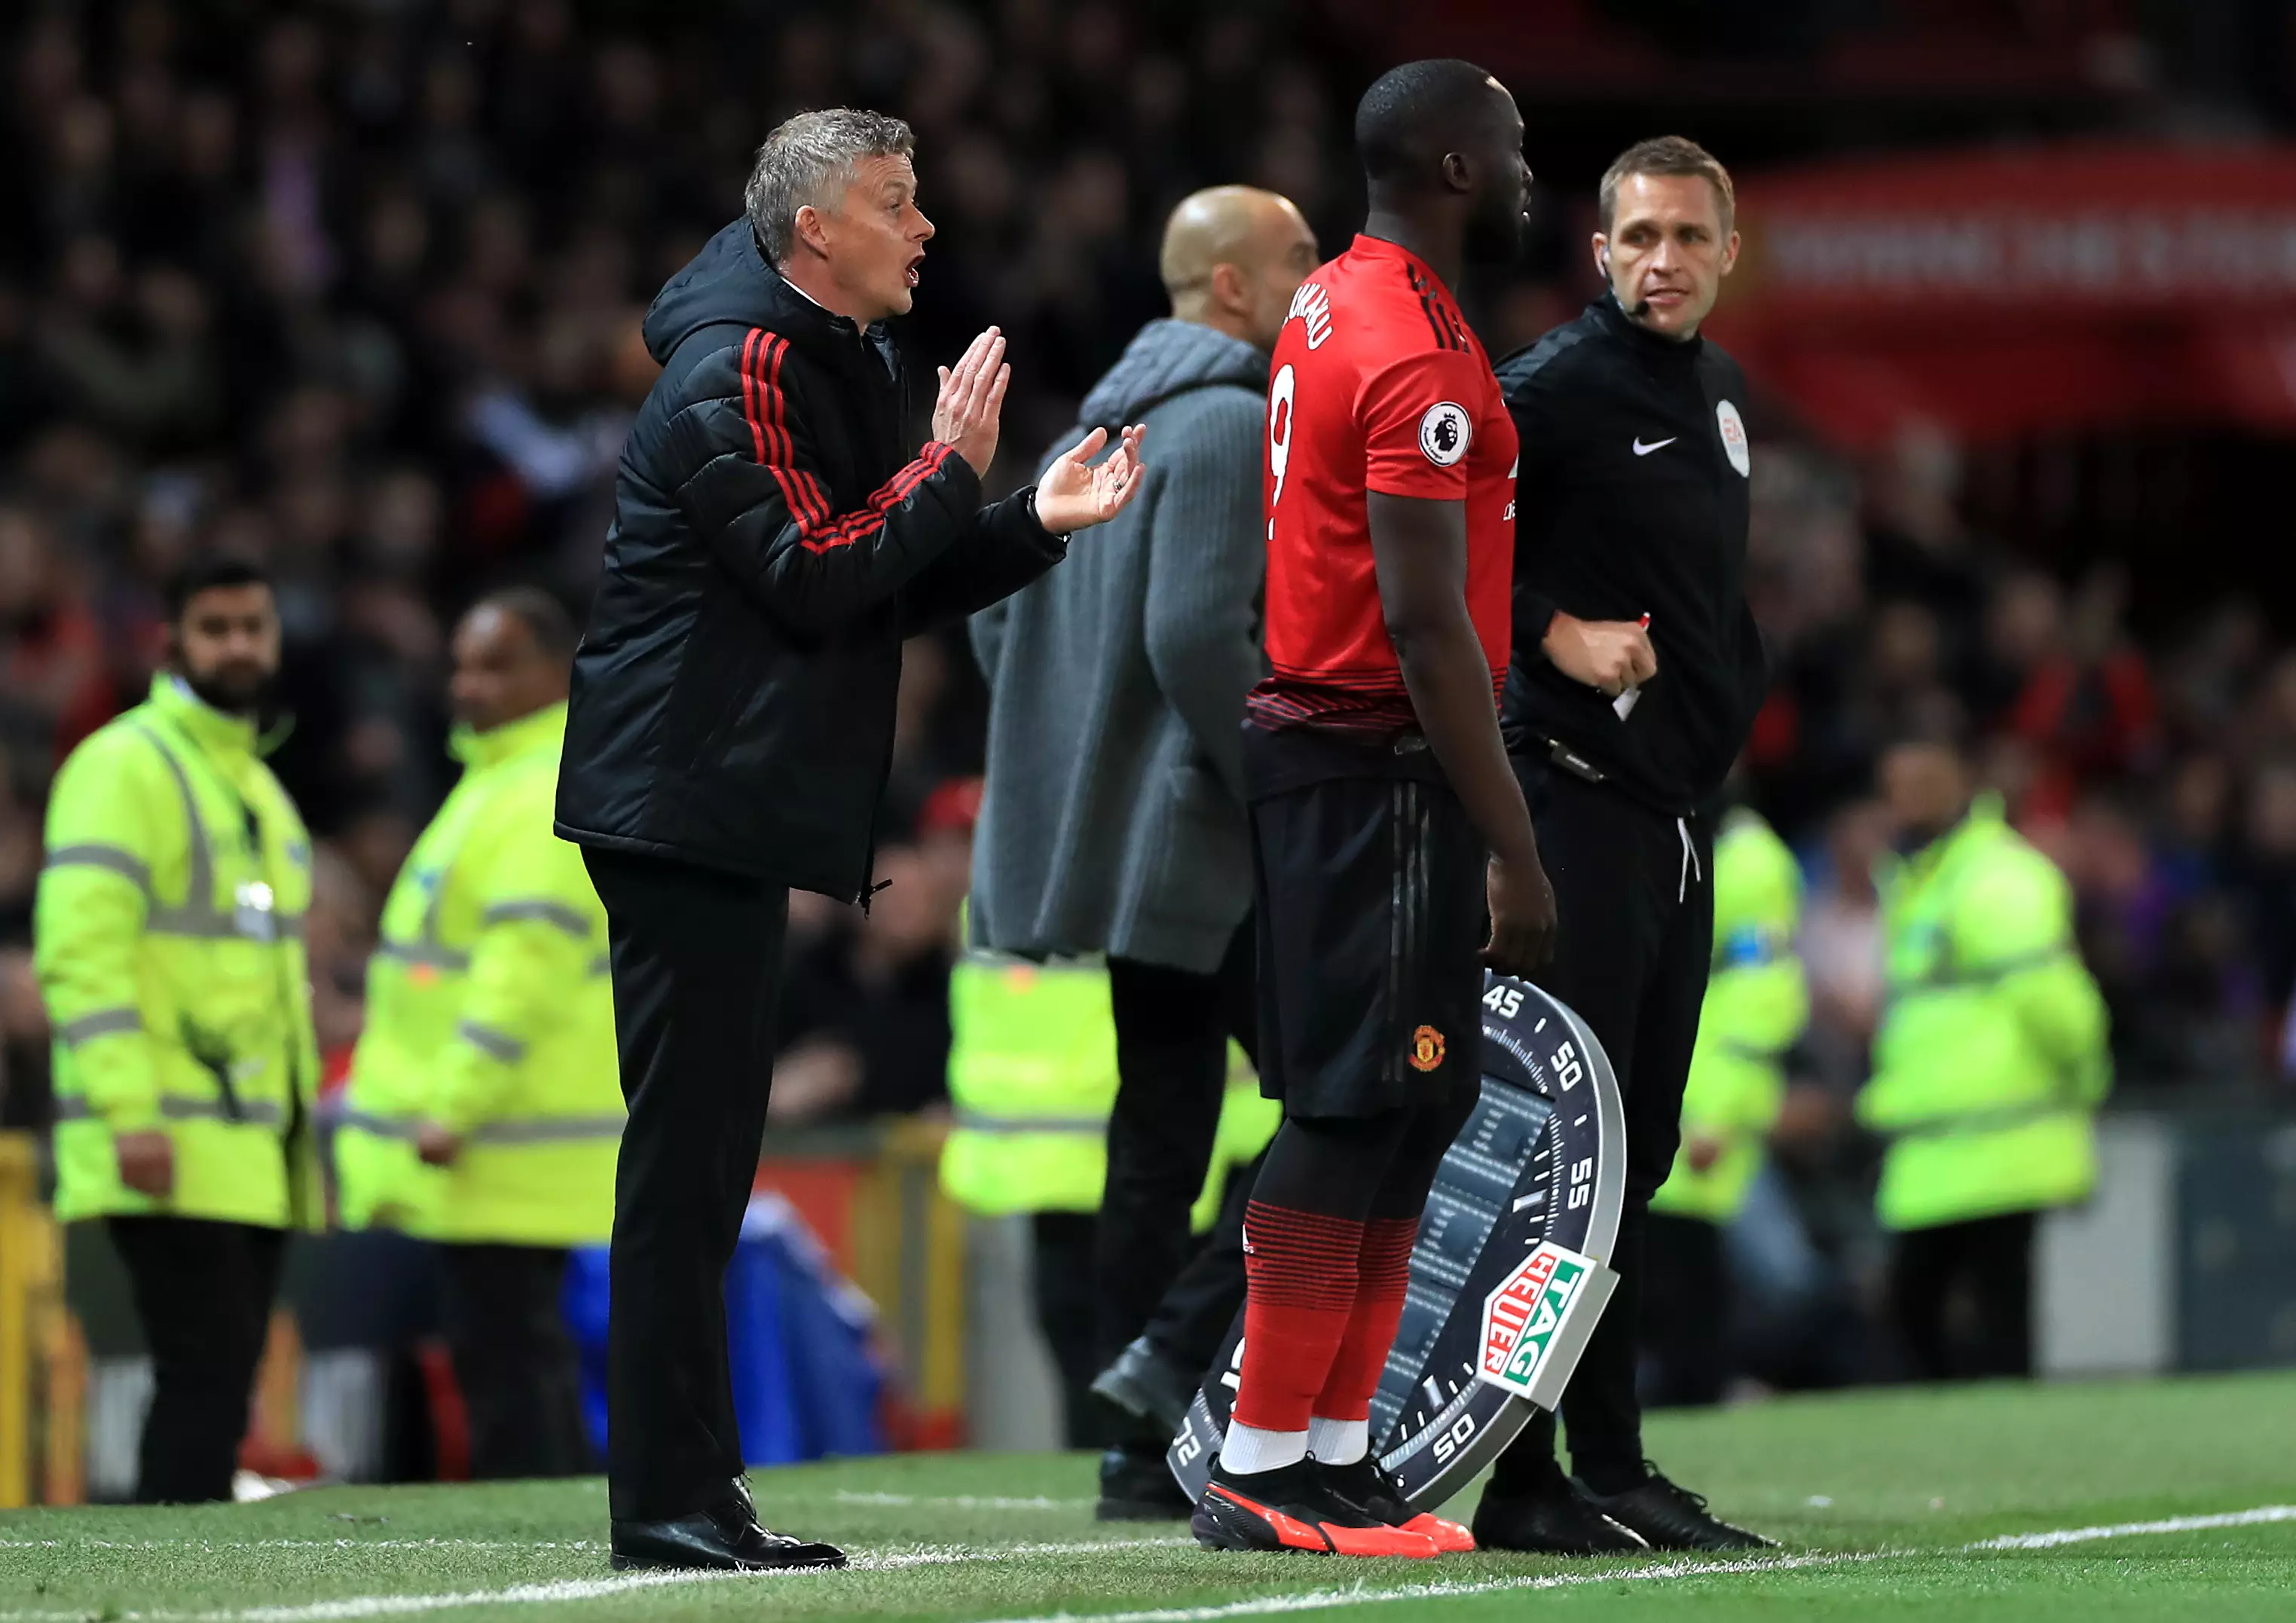 Lukaku coming on as a substitute last year. Image: PA Images